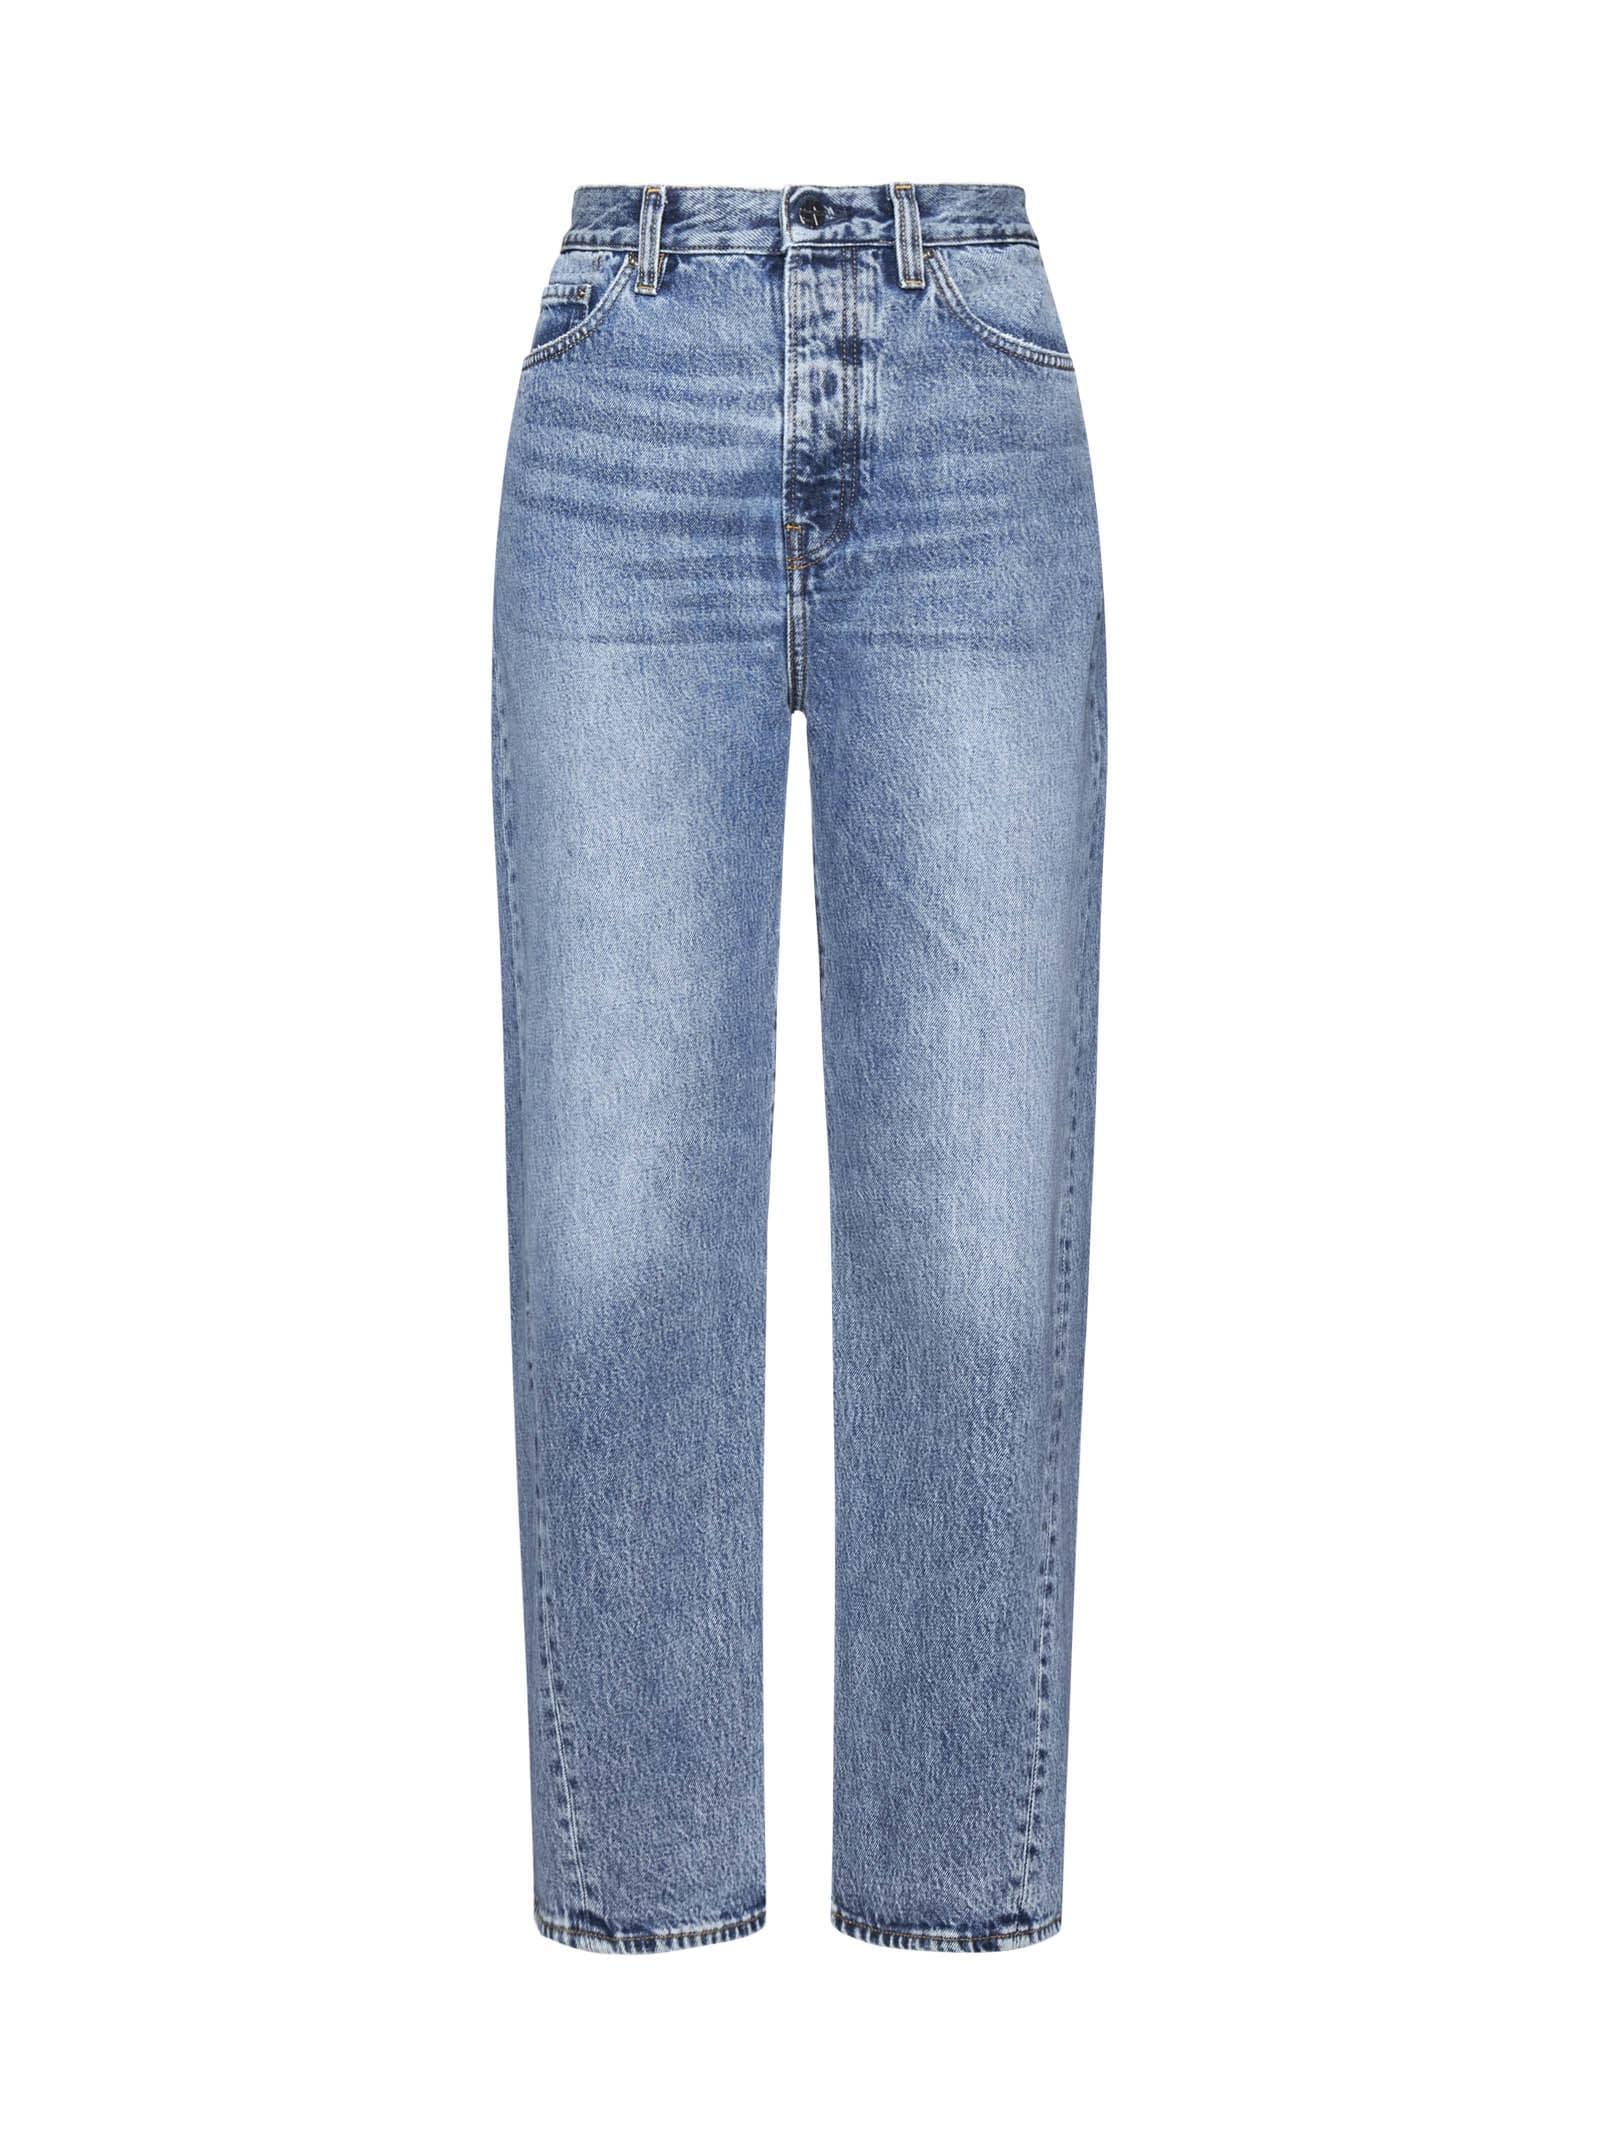 Totême Twisted Seam Jeans in Blue | Lyst